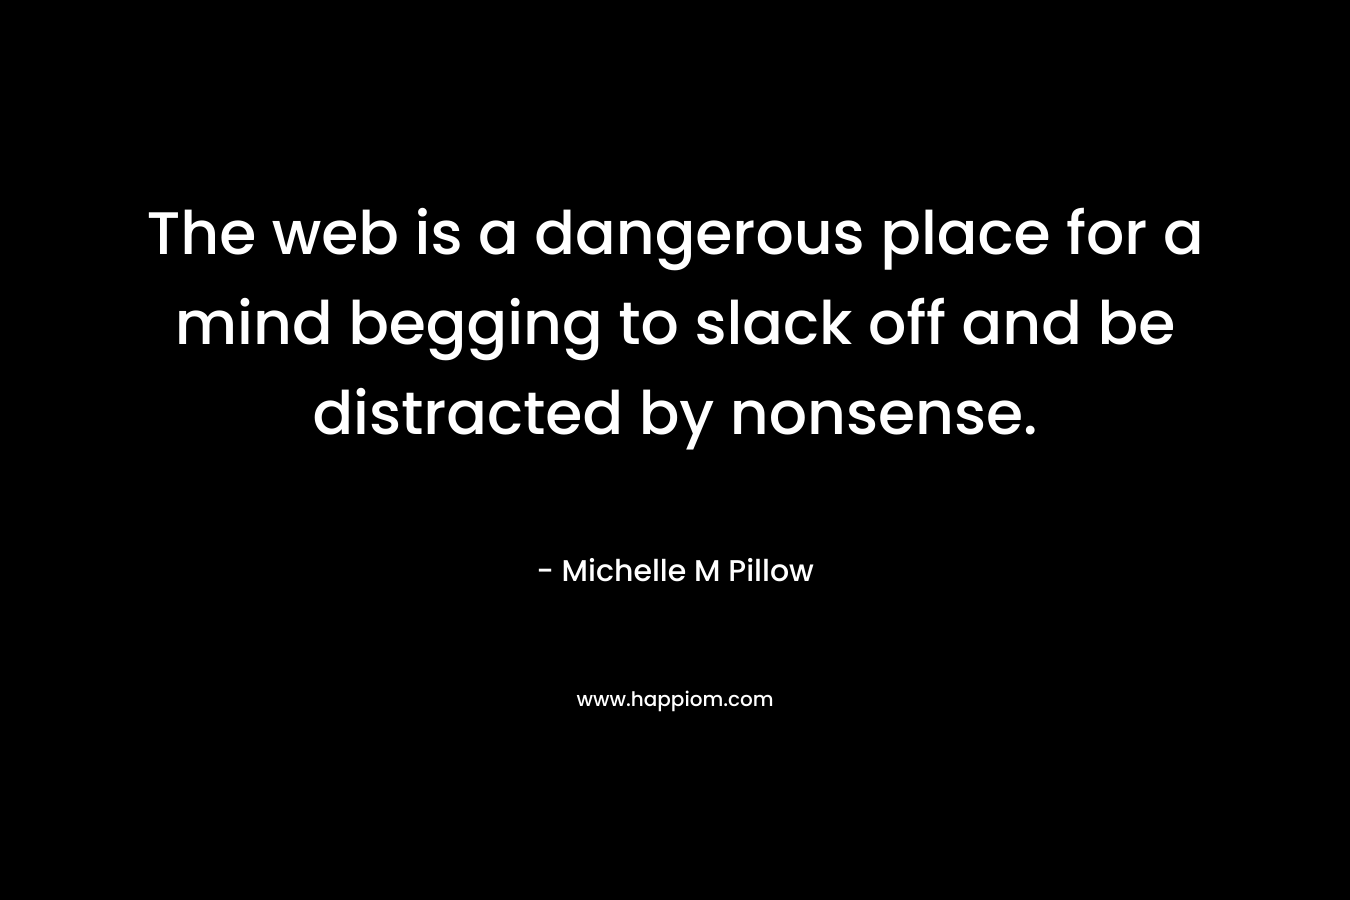 The web is a dangerous place for a mind begging to slack off and be distracted by nonsense. – Michelle M Pillow